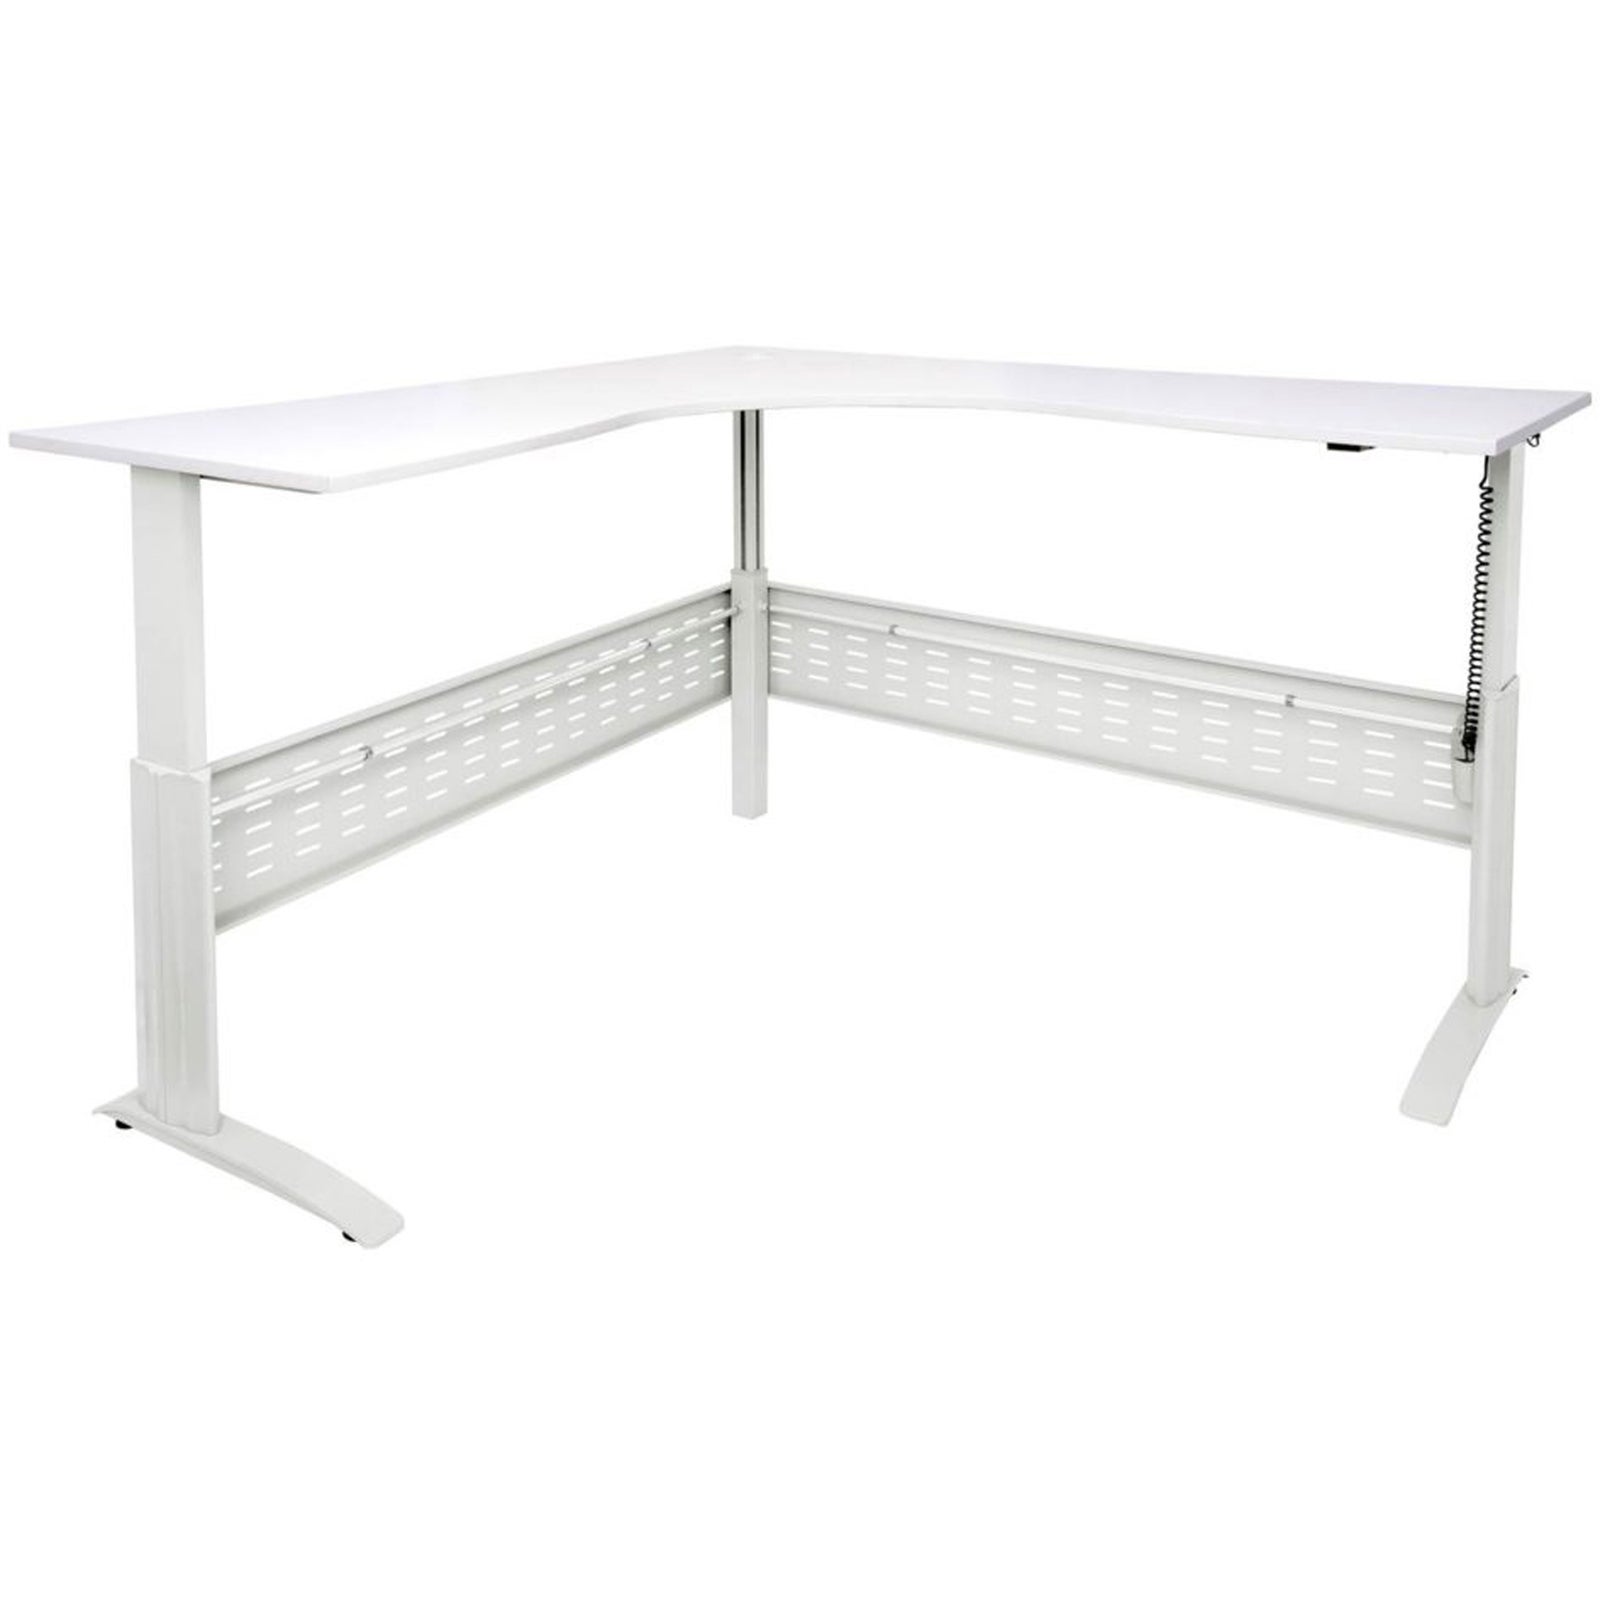 RAPIDLINE RAPID SPAN ELECTRIC CORNER WORKSTATION W1800/1500 x D700 x H685-1205mm Natural White with White Frame